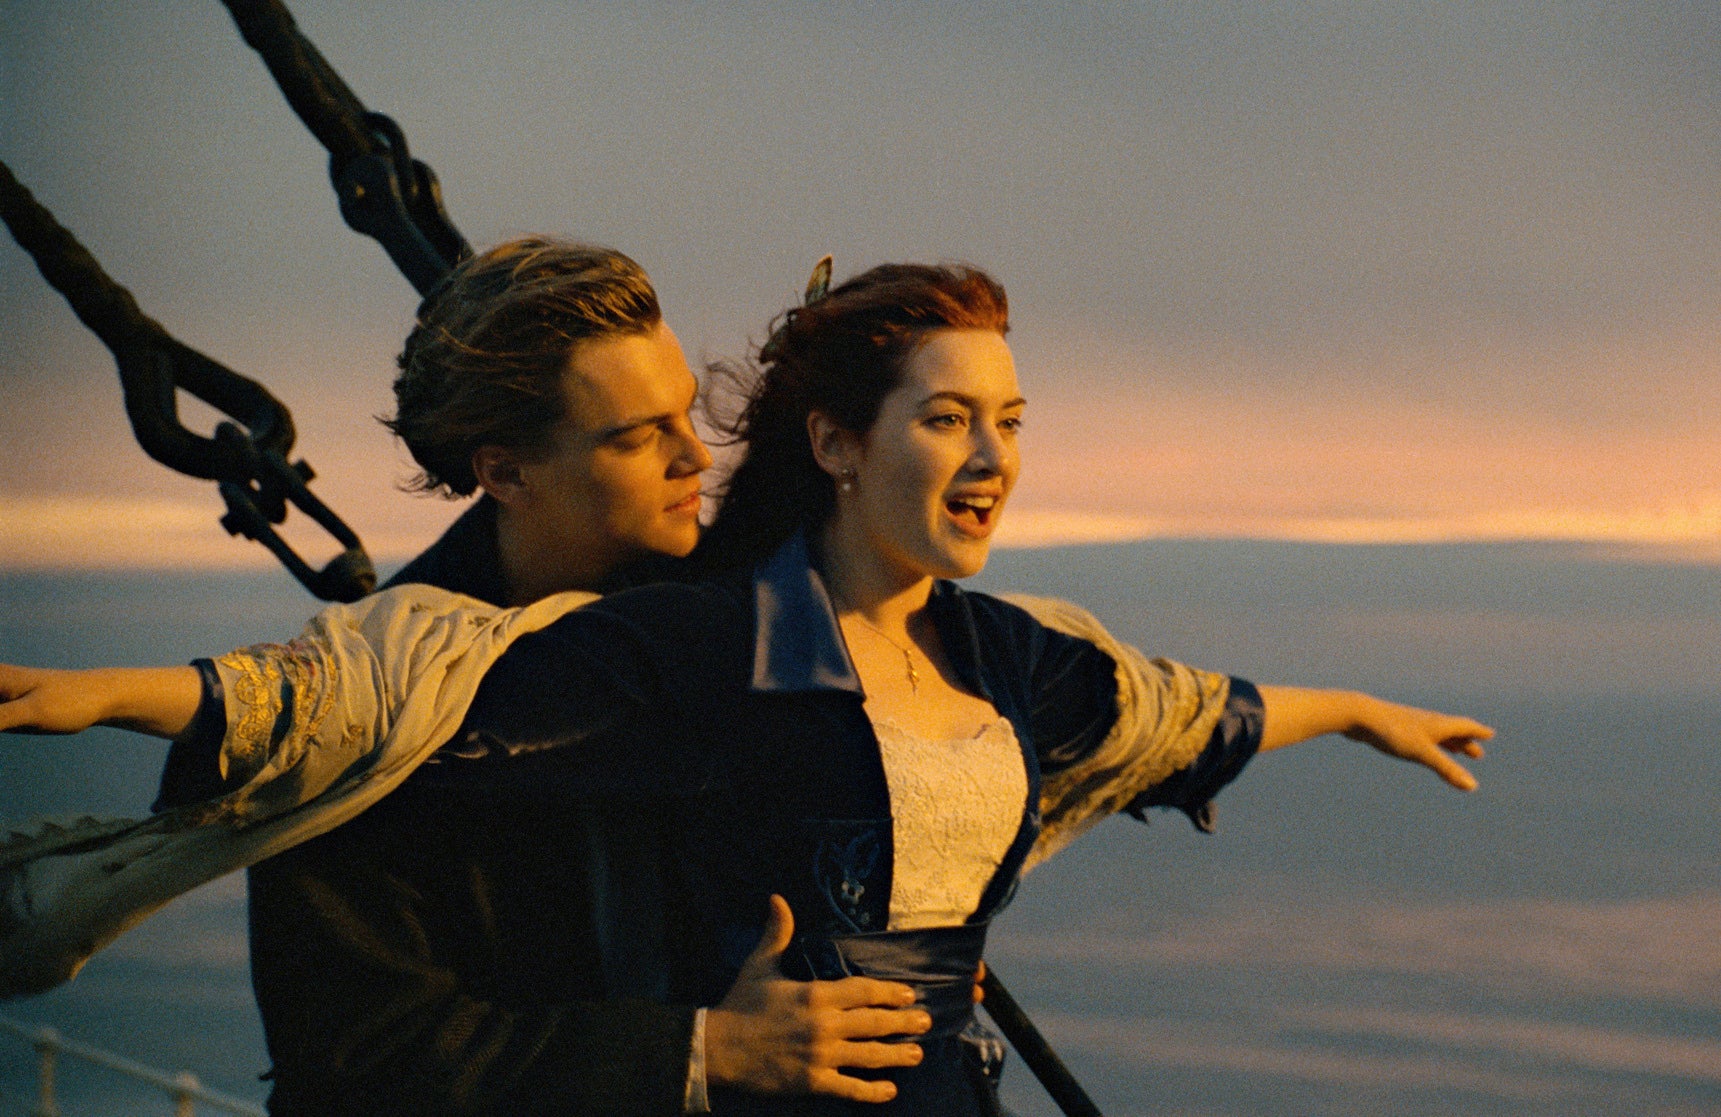 ‘Titanic’ is coming to Netflix in July